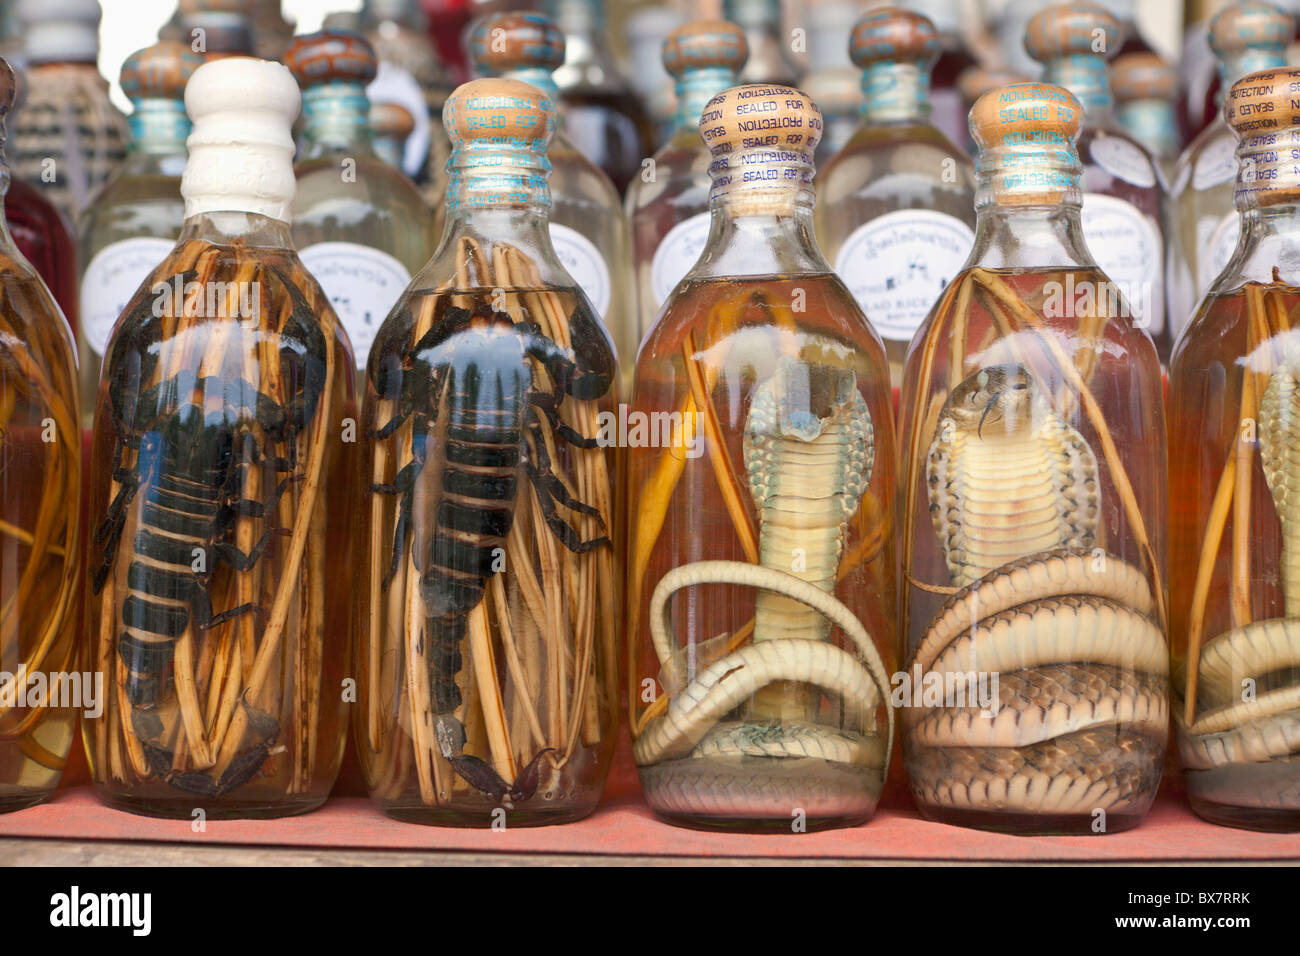 Laotian rum with snakes and scorpions on display at a market stall, Laos Stock Photo